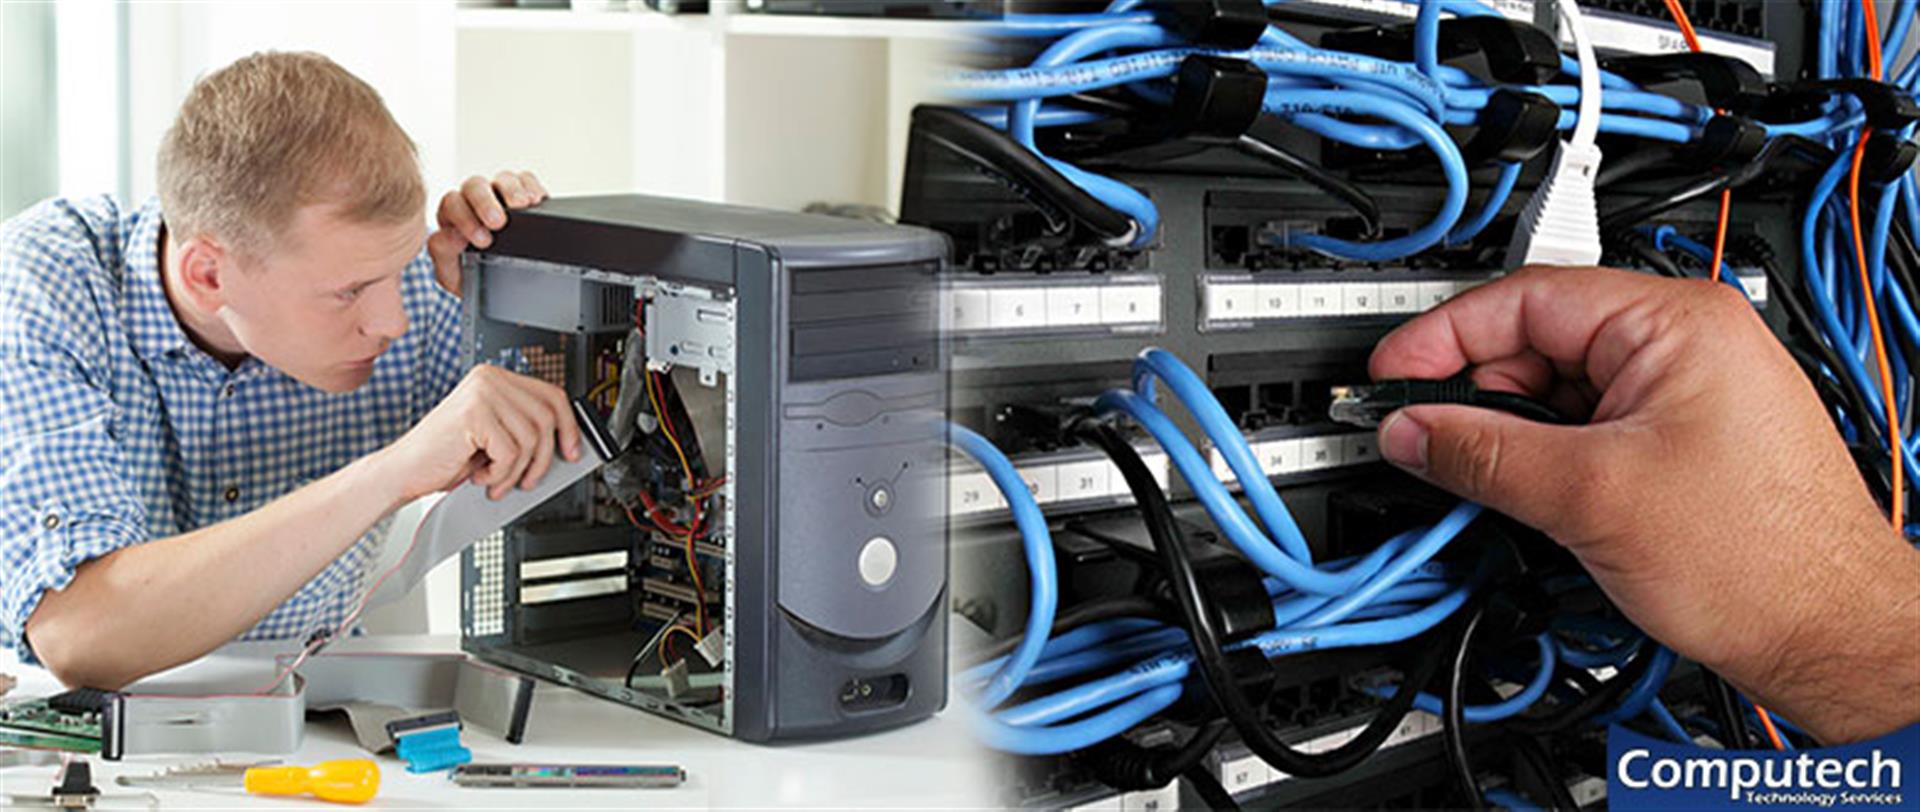 Citronelle Alabama Onsite Computer PC & Printer Repair, Networks, Telecom & Data Wiring Services